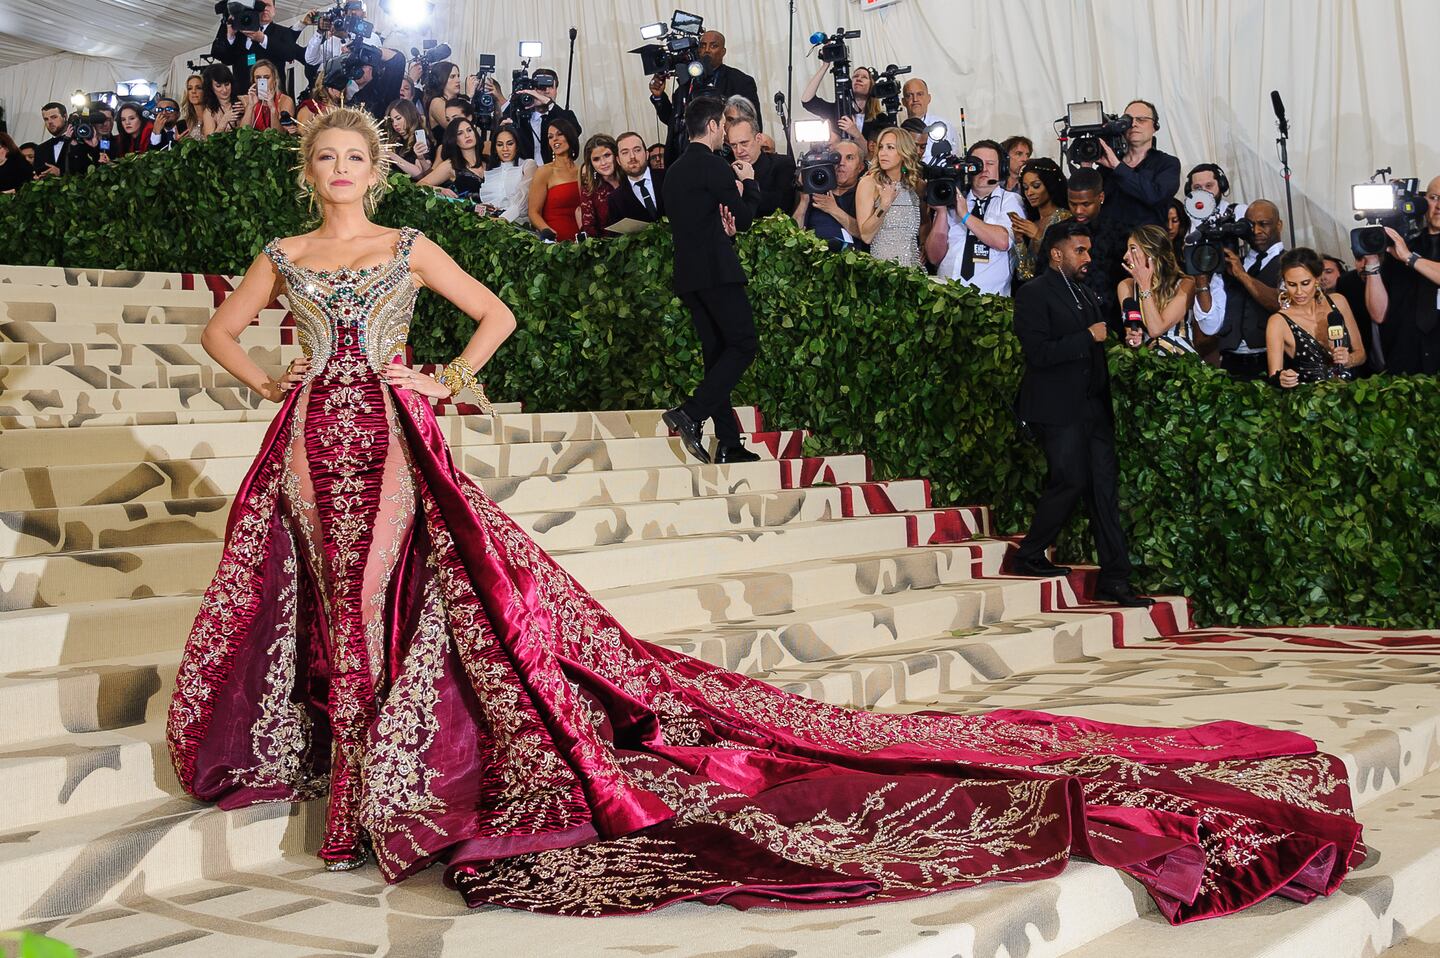 This year's co-chair Blake Lively at the "Heavenly Bodies: Fashion and the Catholic Imagination" Met Gala in 2018.